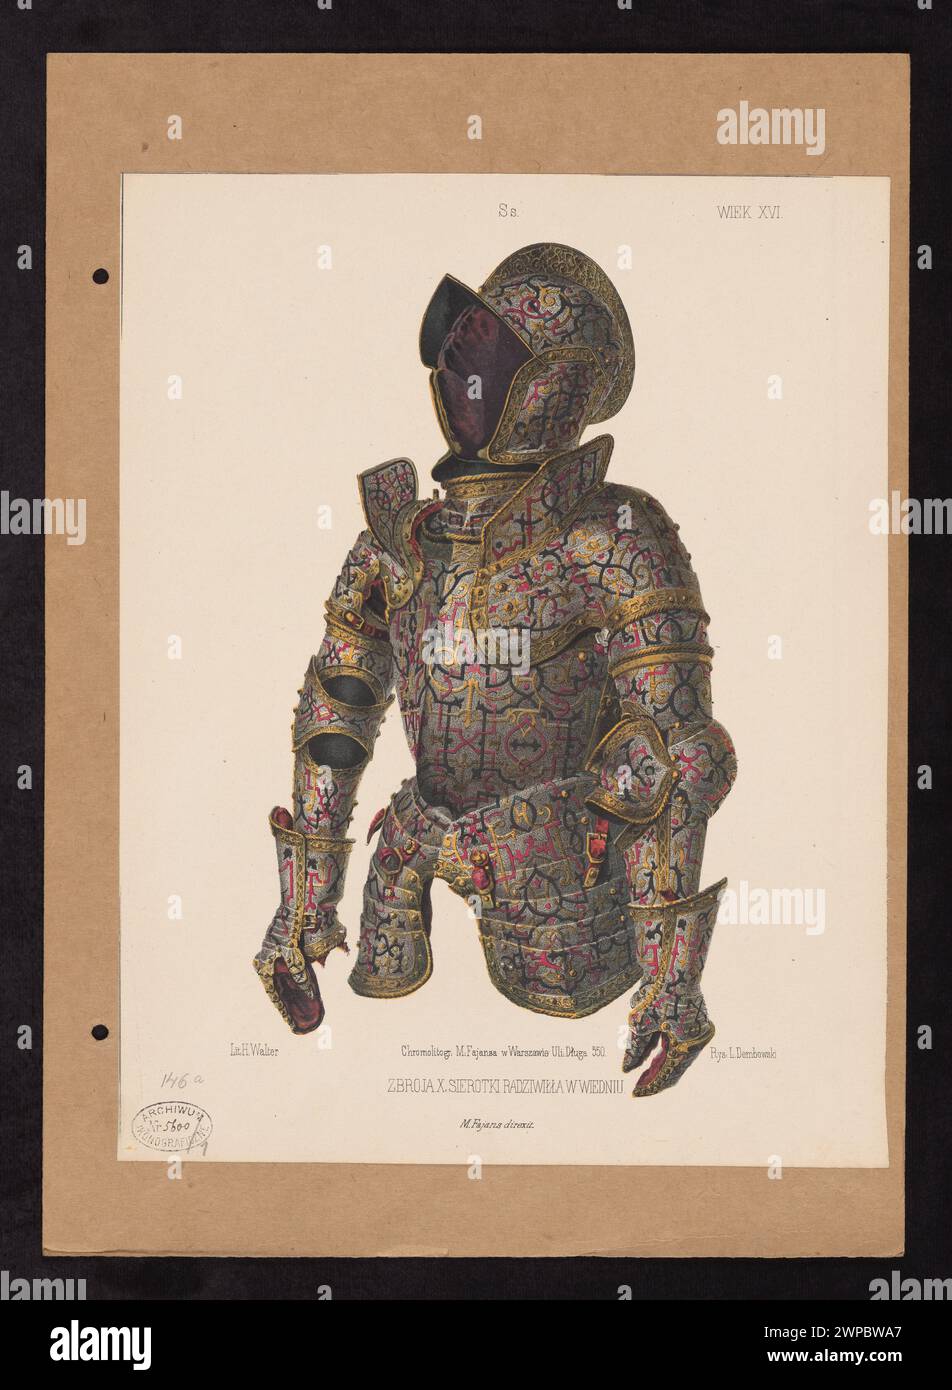 Armor of the 11th Radziwi (orphans) in Vienna, il. Z: Aleksander Przedziecki, Edward Rastawiecki, 'Patterns of the Medaline Art and from the Renaissance era after the end of the 17th century in former Poland' (Warsaw, 1855-1858), Series 2, tab. SS; Dembowski, Leon (1823-1904), Walter, H., Fajans, Maksymilian (Warsaw; lithographic and photographic inn; 1853-1892), Fajans, Maksymilian (1825-1890), Przedziecki, Aleksander (1814-1871), Rastawiecki, Edward (1804-1874), Unger, Józef (Warsaw; Drukarnia, Publisher, Ksi Garnia; 1841-Ca 1877); 1855-1858 (1855-00-00-1858-00-00); Stock Photo